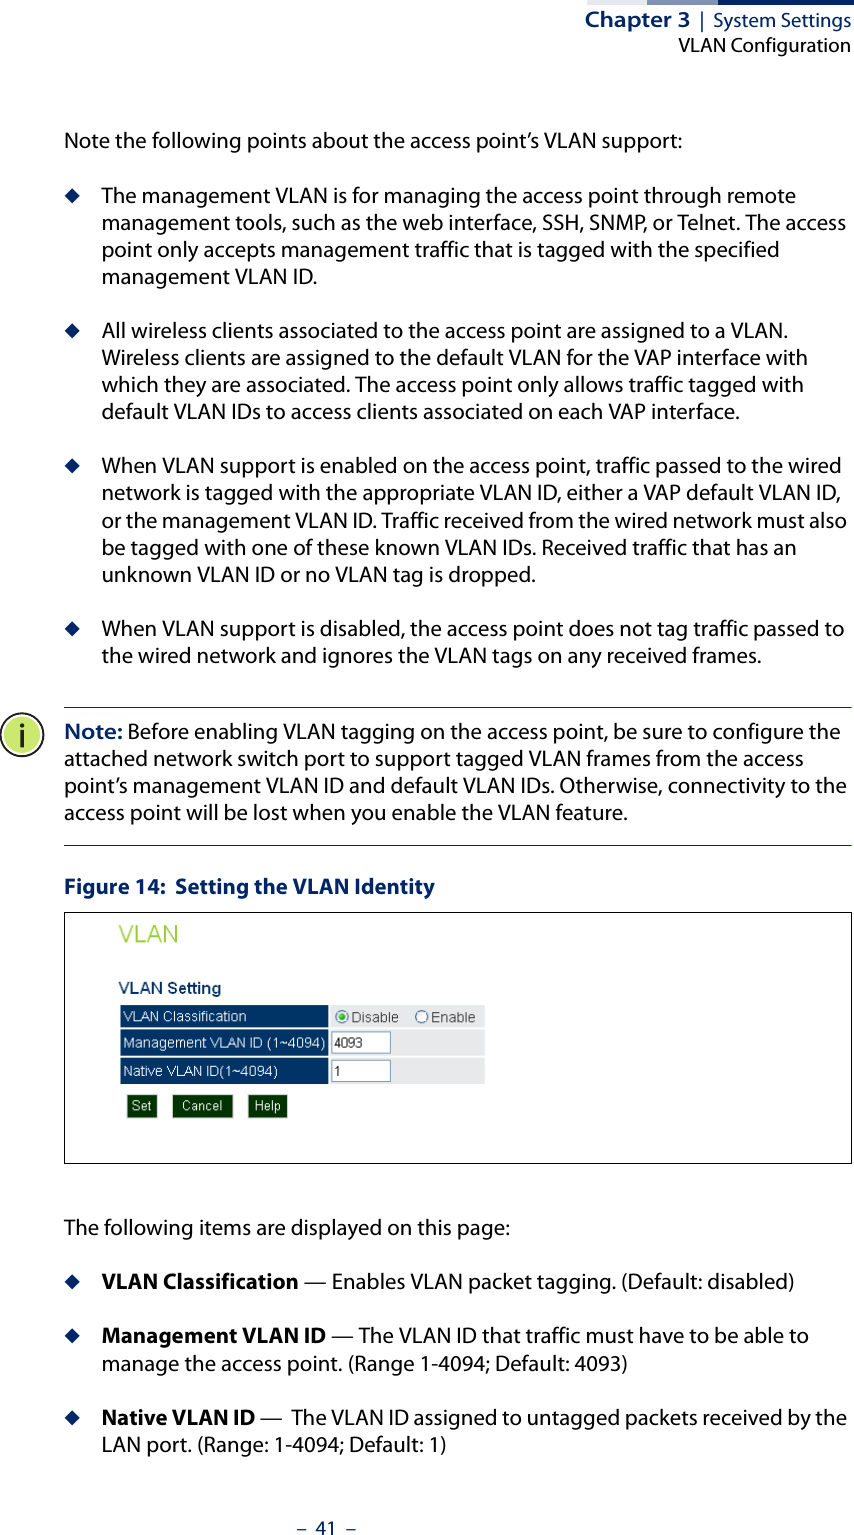 Chapter 3  |  System SettingsVLAN Configuration–  41  –Note the following points about the access point’s VLAN support:◆The management VLAN is for managing the access point through remote management tools, such as the web interface, SSH, SNMP, or Telnet. The access point only accepts management traffic that is tagged with the specified management VLAN ID.◆All wireless clients associated to the access point are assigned to a VLAN. Wireless clients are assigned to the default VLAN for the VAP interface with which they are associated. The access point only allows traffic tagged with default VLAN IDs to access clients associated on each VAP interface.◆When VLAN support is enabled on the access point, traffic passed to the wired network is tagged with the appropriate VLAN ID, either a VAP default VLAN ID, or the management VLAN ID. Traffic received from the wired network must also be tagged with one of these known VLAN IDs. Received traffic that has an unknown VLAN ID or no VLAN tag is dropped.◆When VLAN support is disabled, the access point does not tag traffic passed to the wired network and ignores the VLAN tags on any received frames.Note: Before enabling VLAN tagging on the access point, be sure to configure the attached network switch port to support tagged VLAN frames from the access point’s management VLAN ID and default VLAN IDs. Otherwise, connectivity to the access point will be lost when you enable the VLAN feature.Figure 14:  Setting the VLAN IdentityThe following items are displayed on this page:◆VLAN Classification — Enables VLAN packet tagging. (Default: disabled)◆Management VLAN ID — The VLAN ID that traffic must have to be able to manage the access point. (Range 1-4094; Default: 4093)◆Native VLAN ID —  The VLAN ID assigned to untagged packets received by the LAN port. (Range: 1-4094; Default: 1)